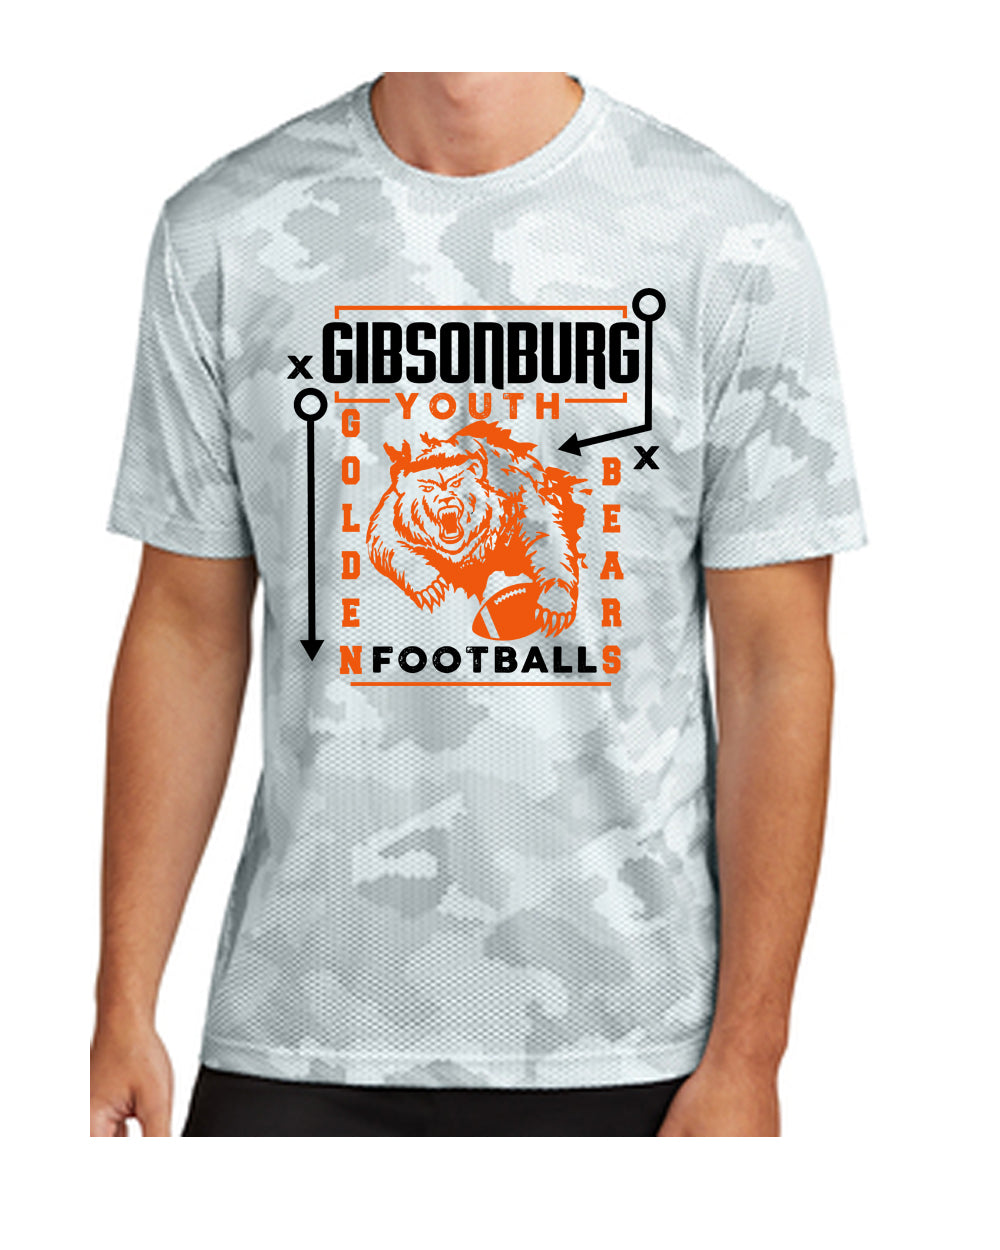 Gibsonburg Youth Football CamoHex YOUTH T-Shirt